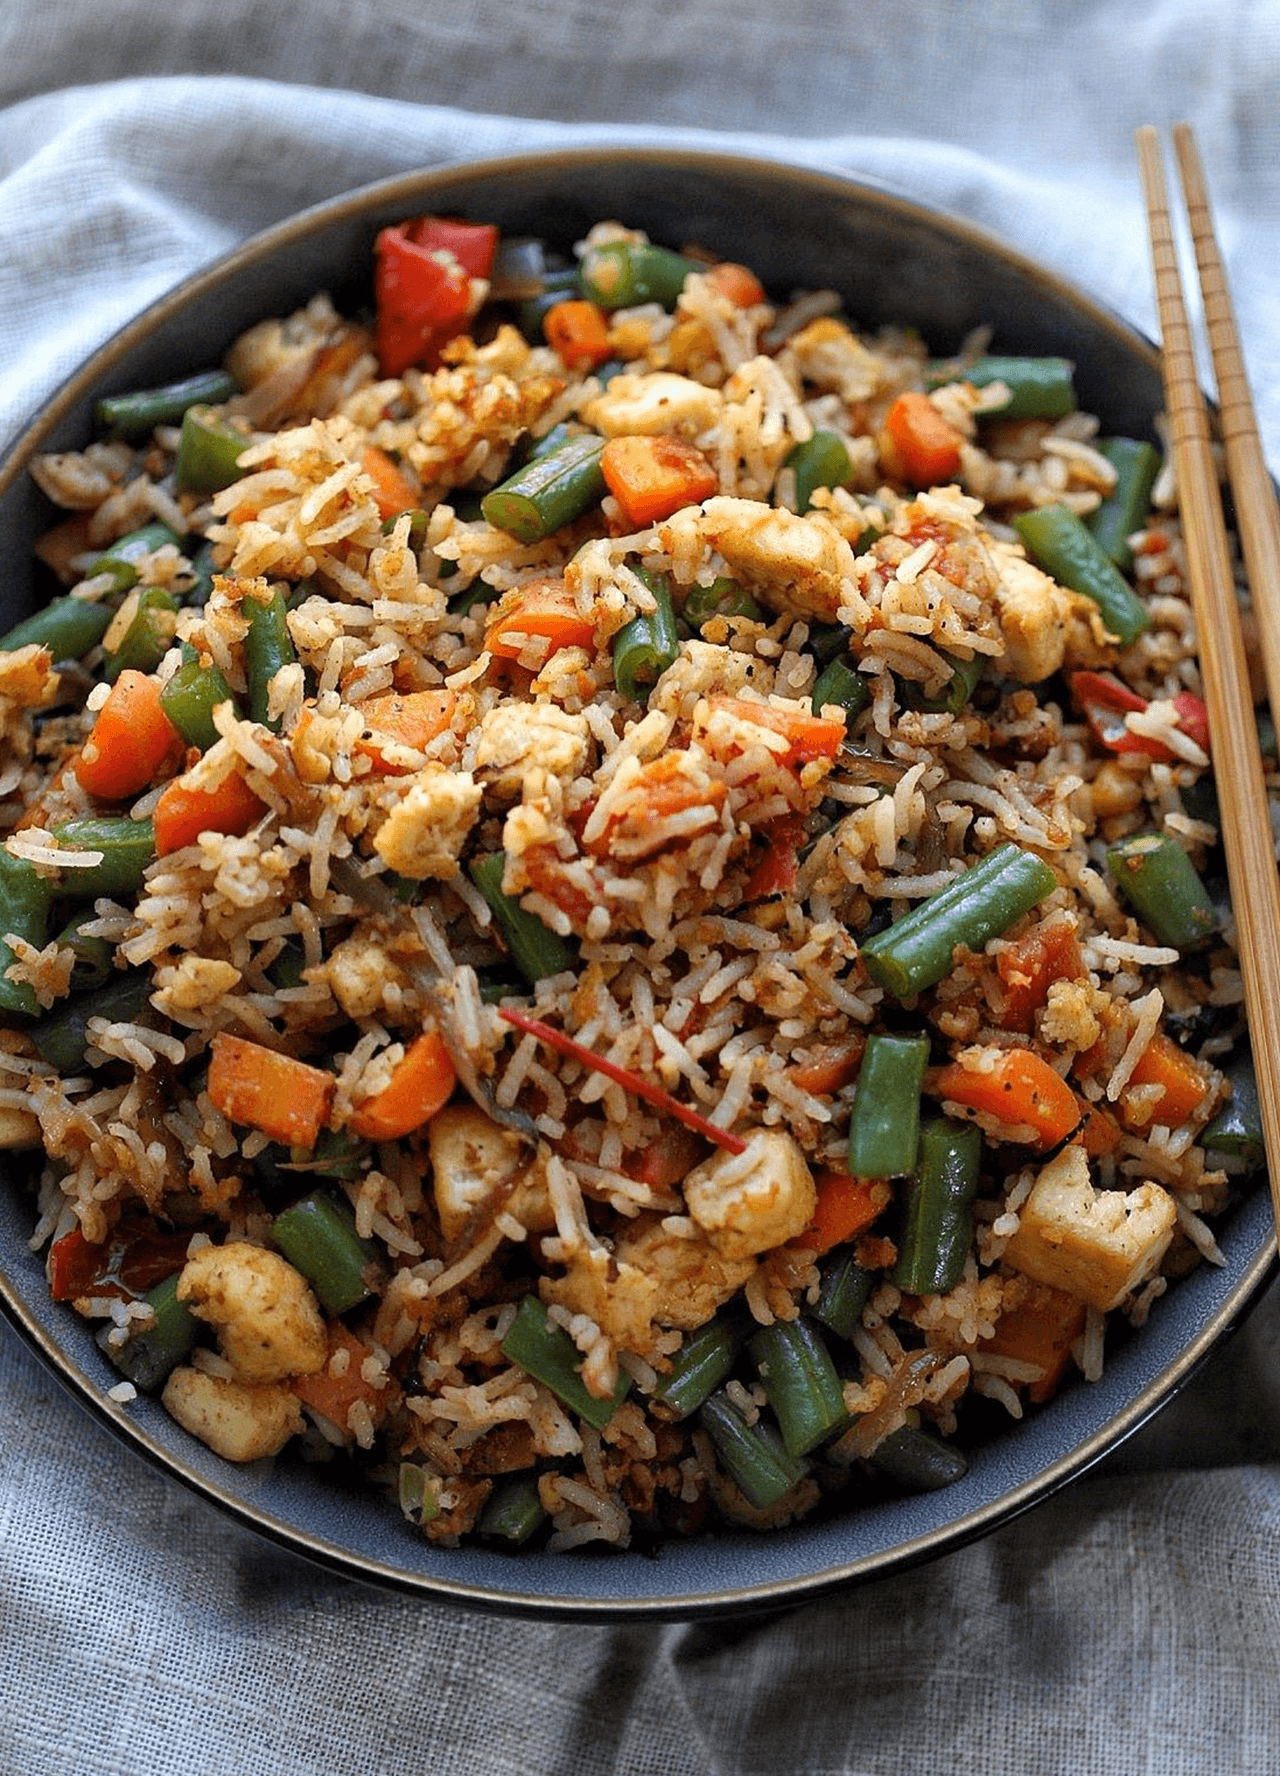 You are currently viewing Fried Rice Vegetables w/ Chicken or Pork